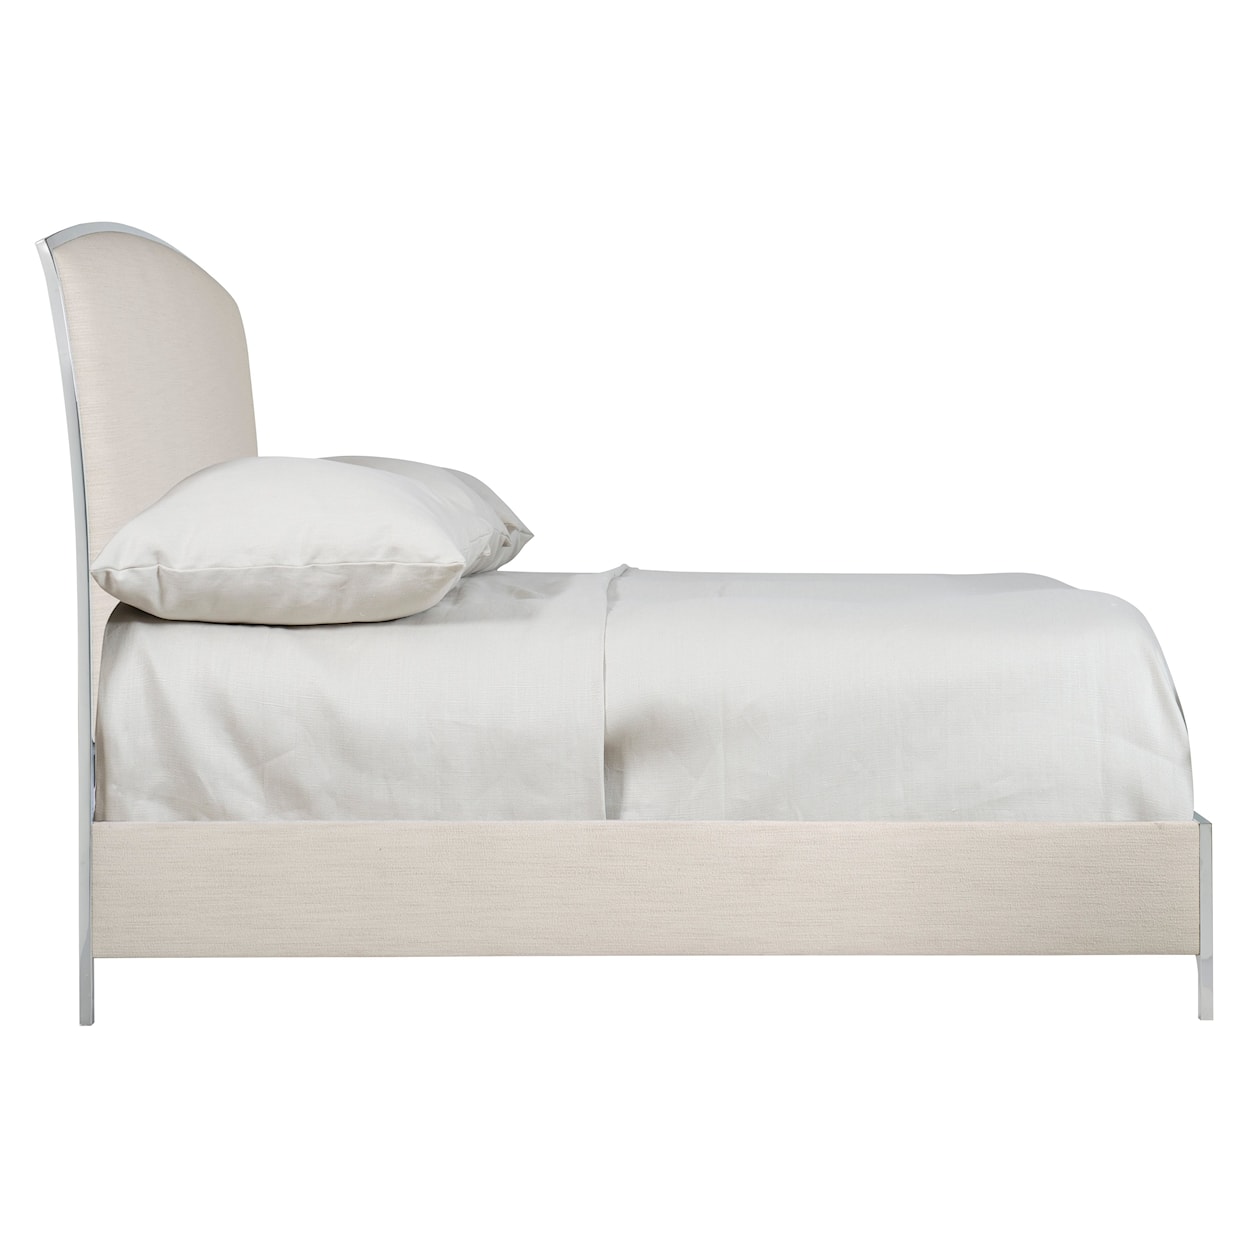 Bernhardt Silhouette Silhouette Panel Bed King